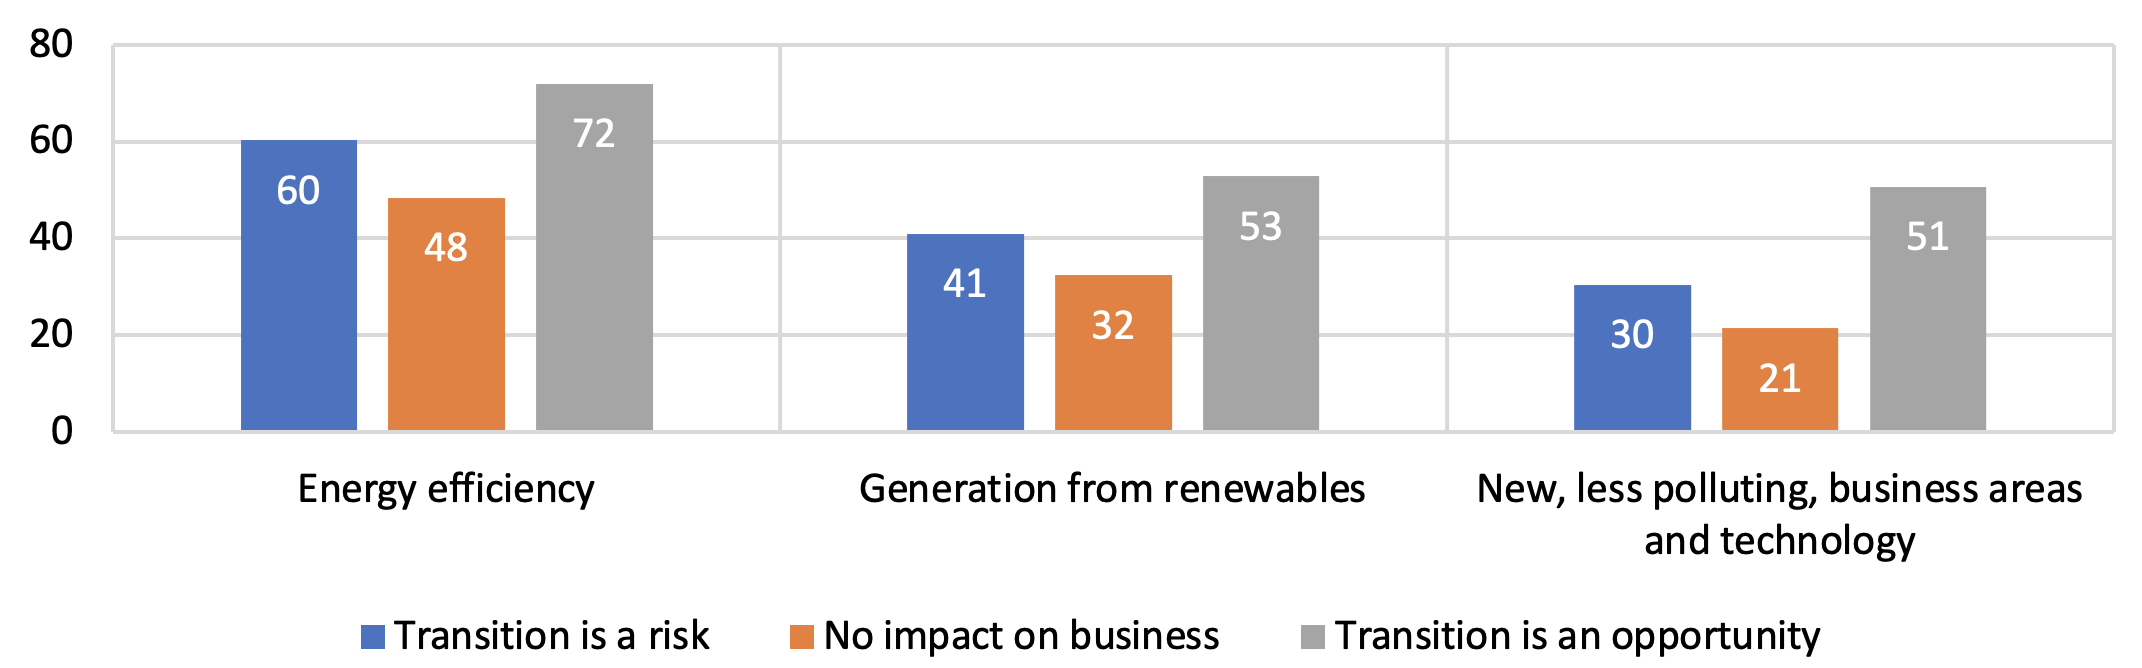 Figure 12 Climate change mitigation investment undertaken by EU firms, according to their perceptio of the climate transition